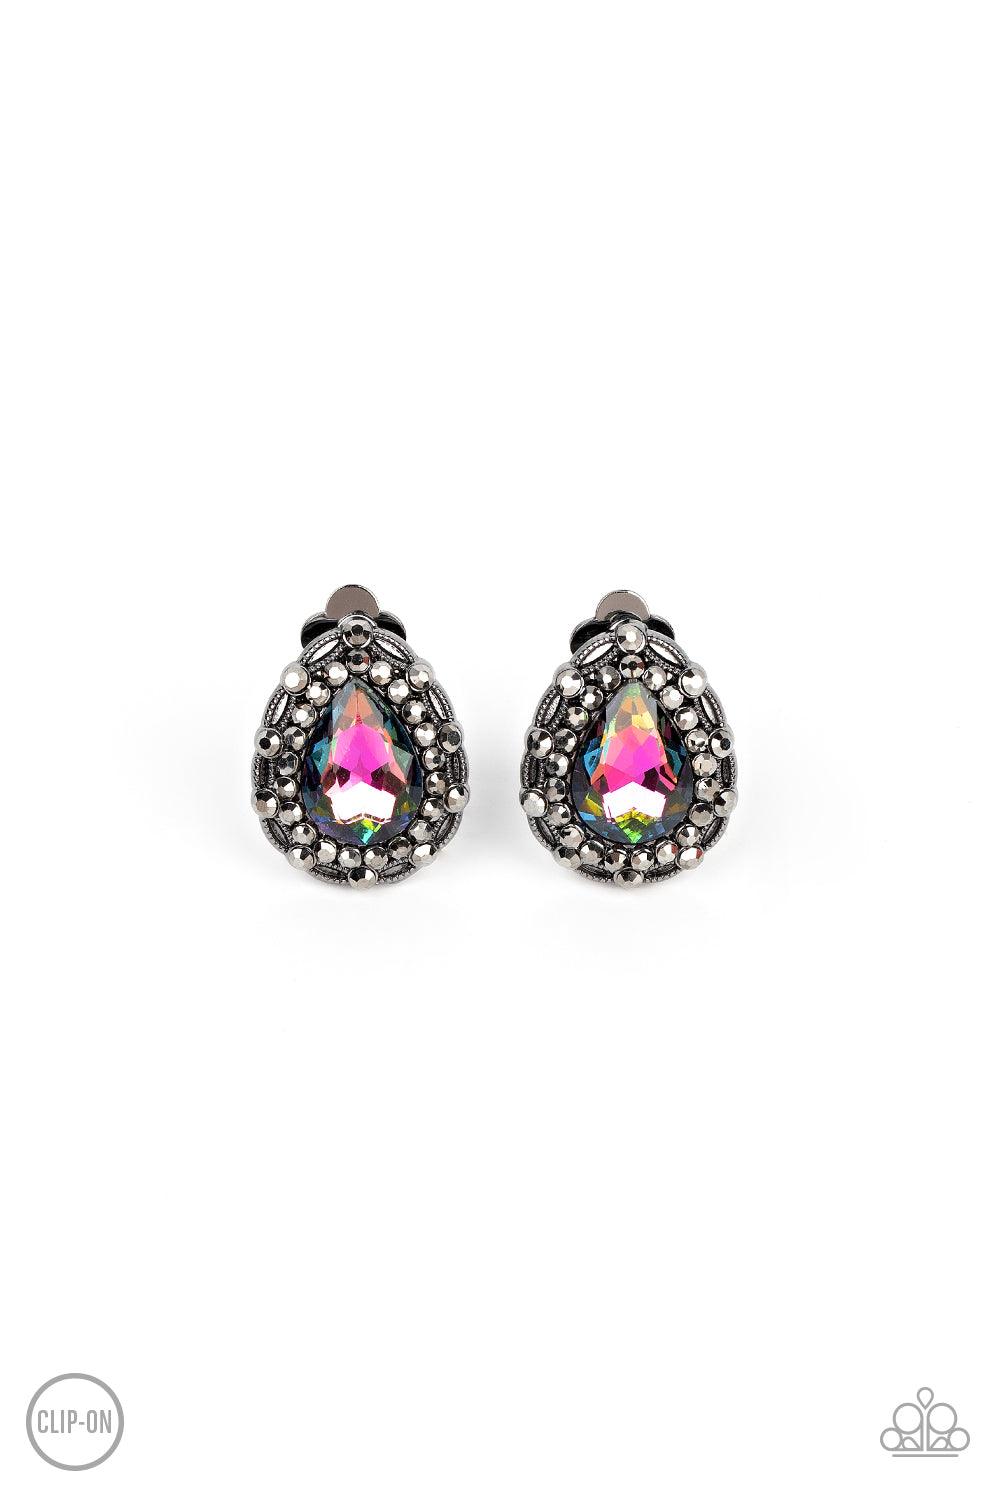 Paparazzi Accessories Haute Happy Hour - Multi *Clip-On An oversized oil spill teardrop gem is elegantly bordered in glitzy hematite rhinestones atop a decorative gunmetal frame, culminating into a smoldering twinkle. Earring attaches to a standard clip-o